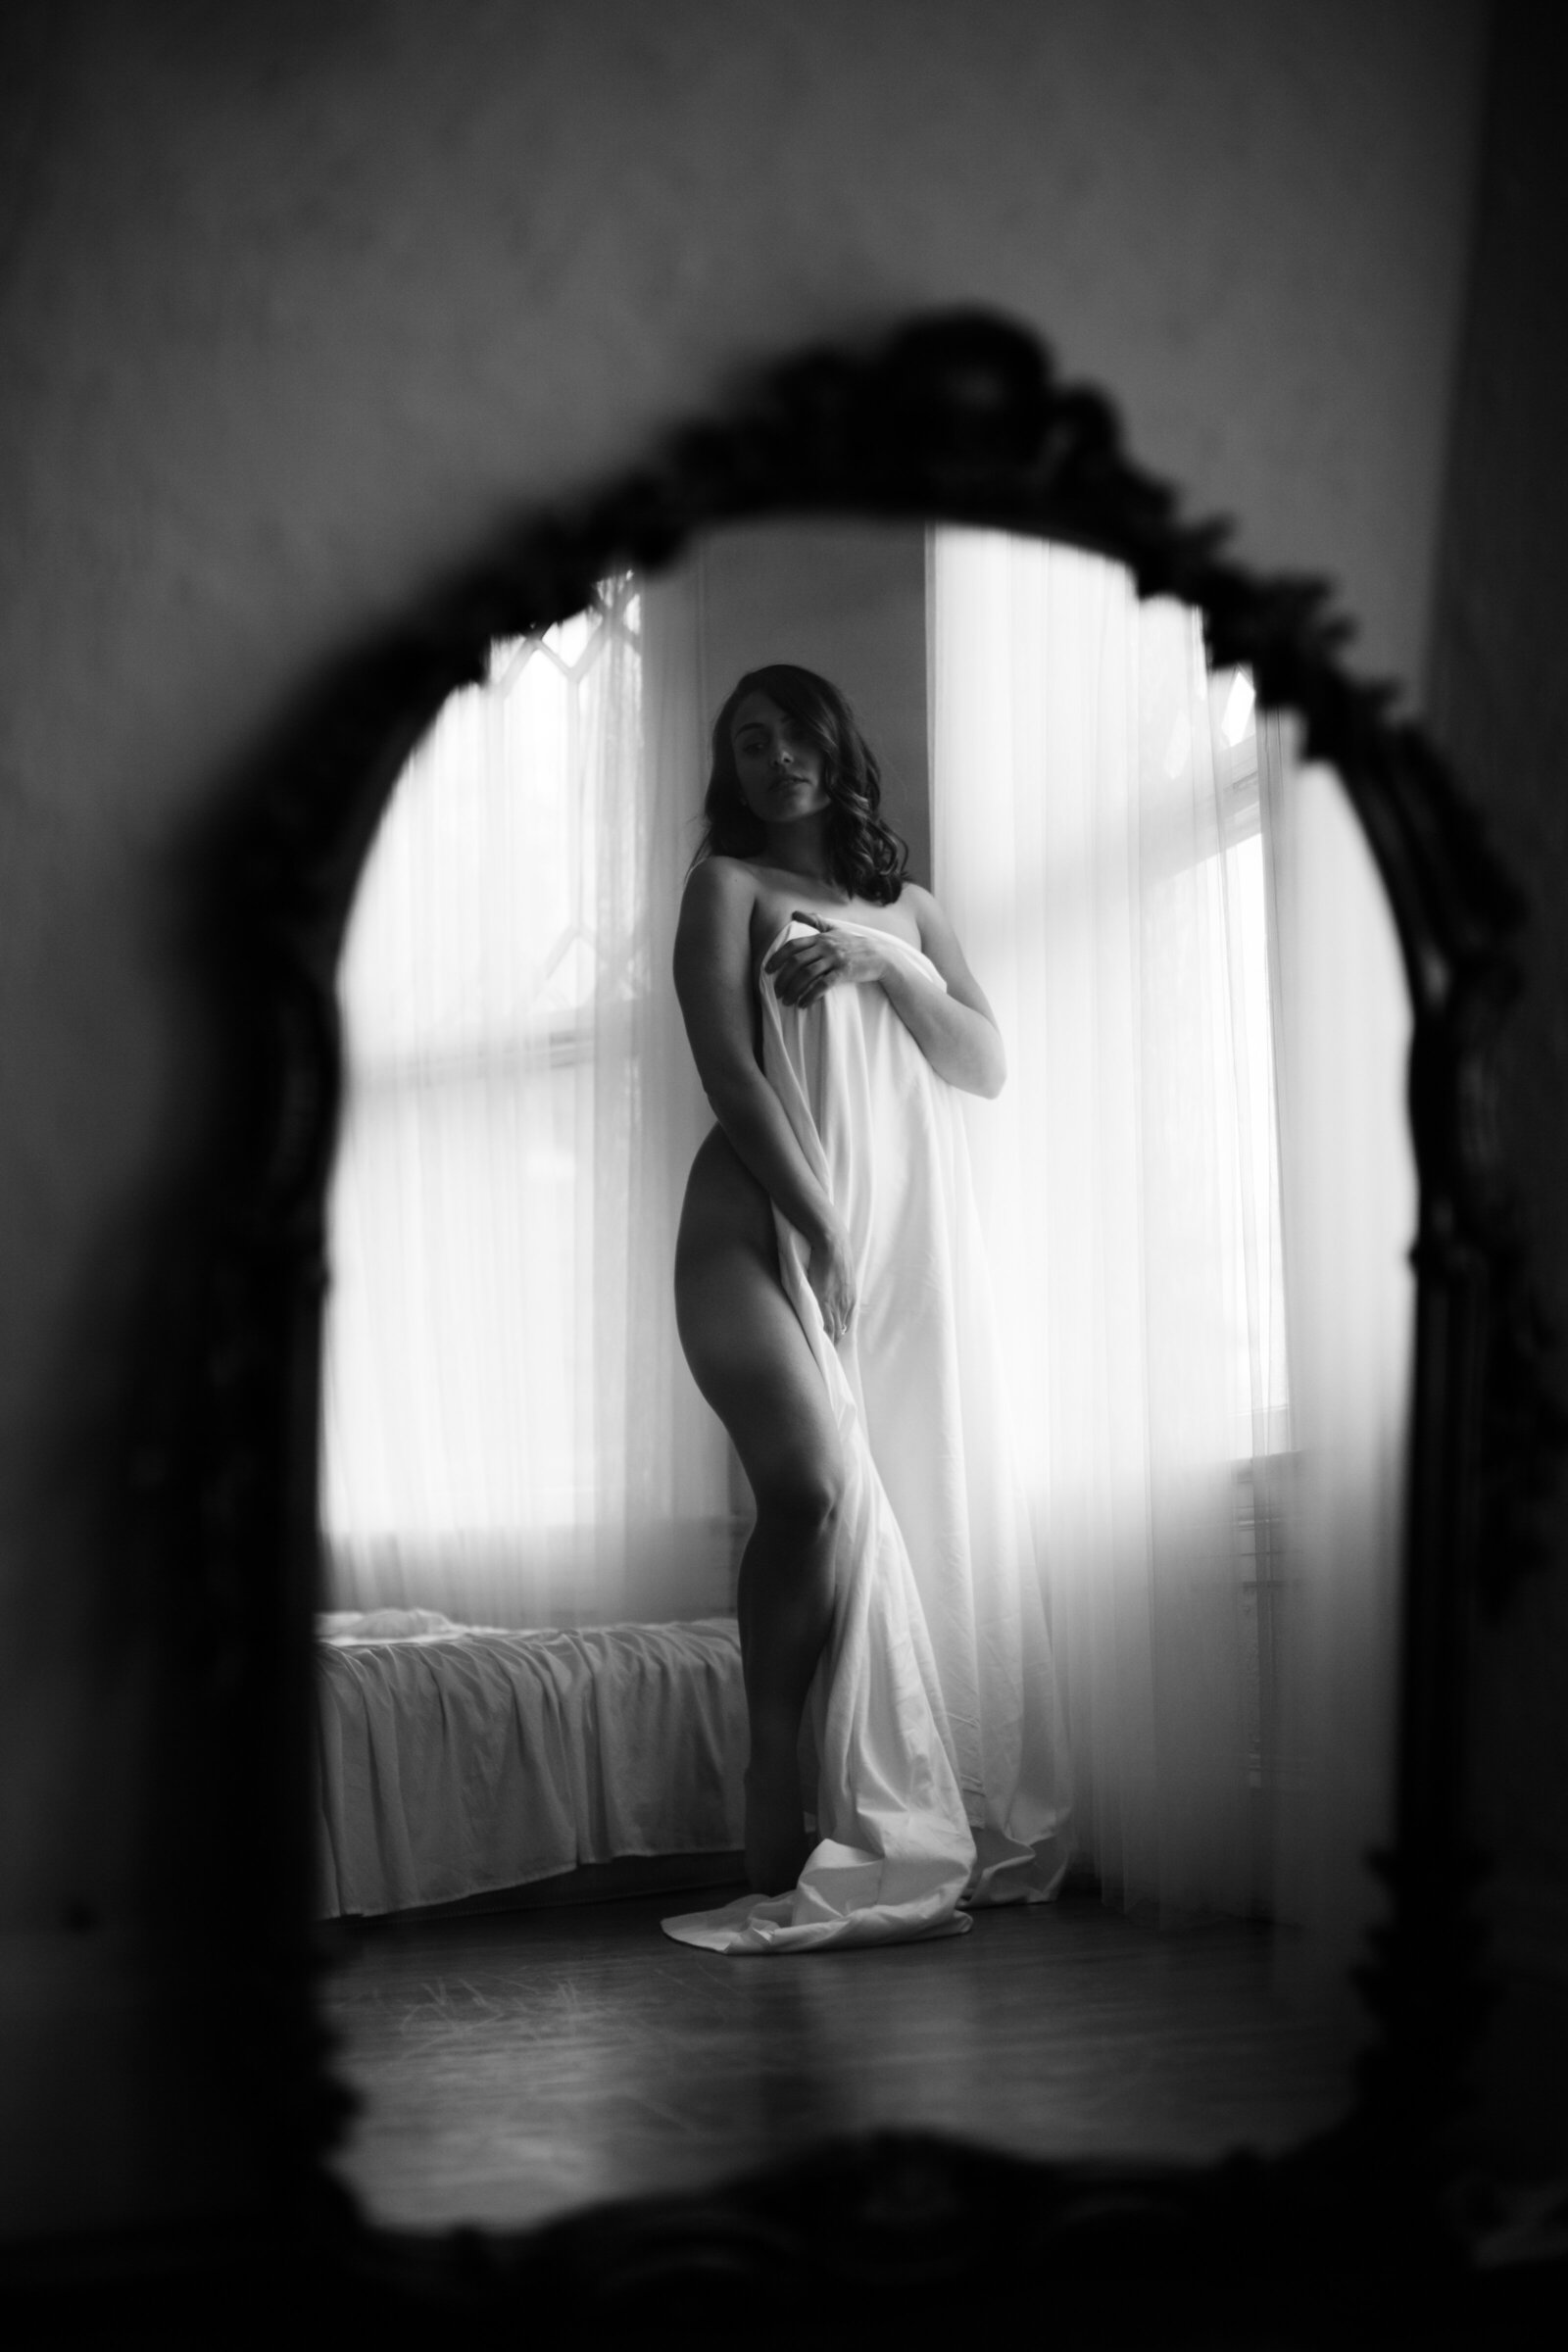 Black and white boudoir photo of a woman looking in a mirror